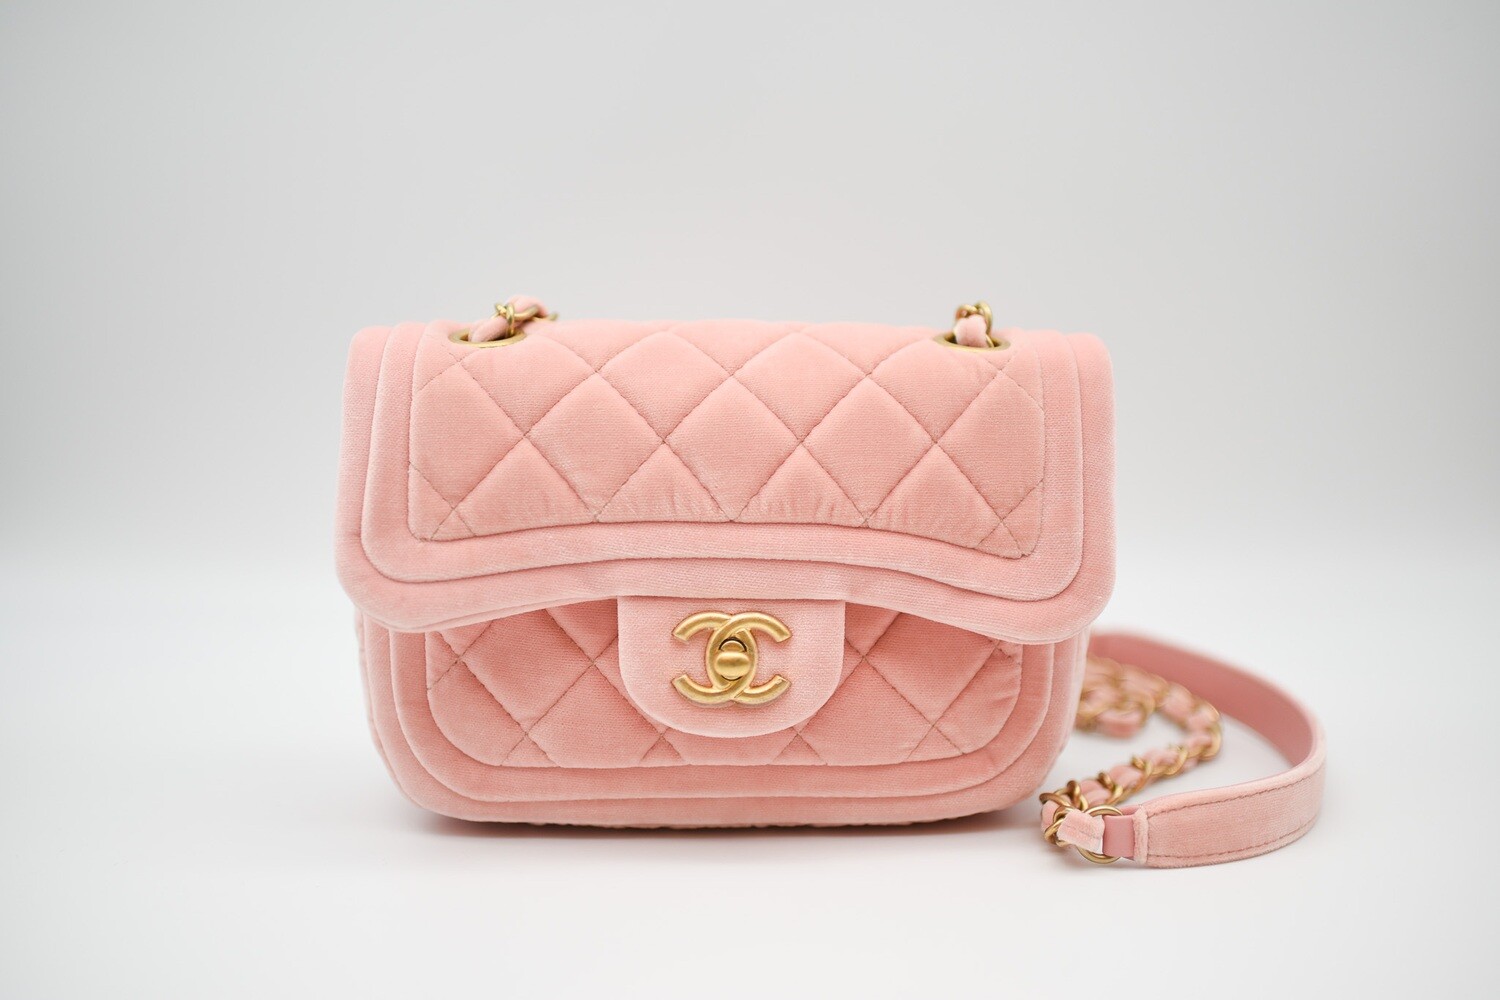 Chanel Seasonal Flap, Pink Velvet with Gold Hardware, New in Box WA001